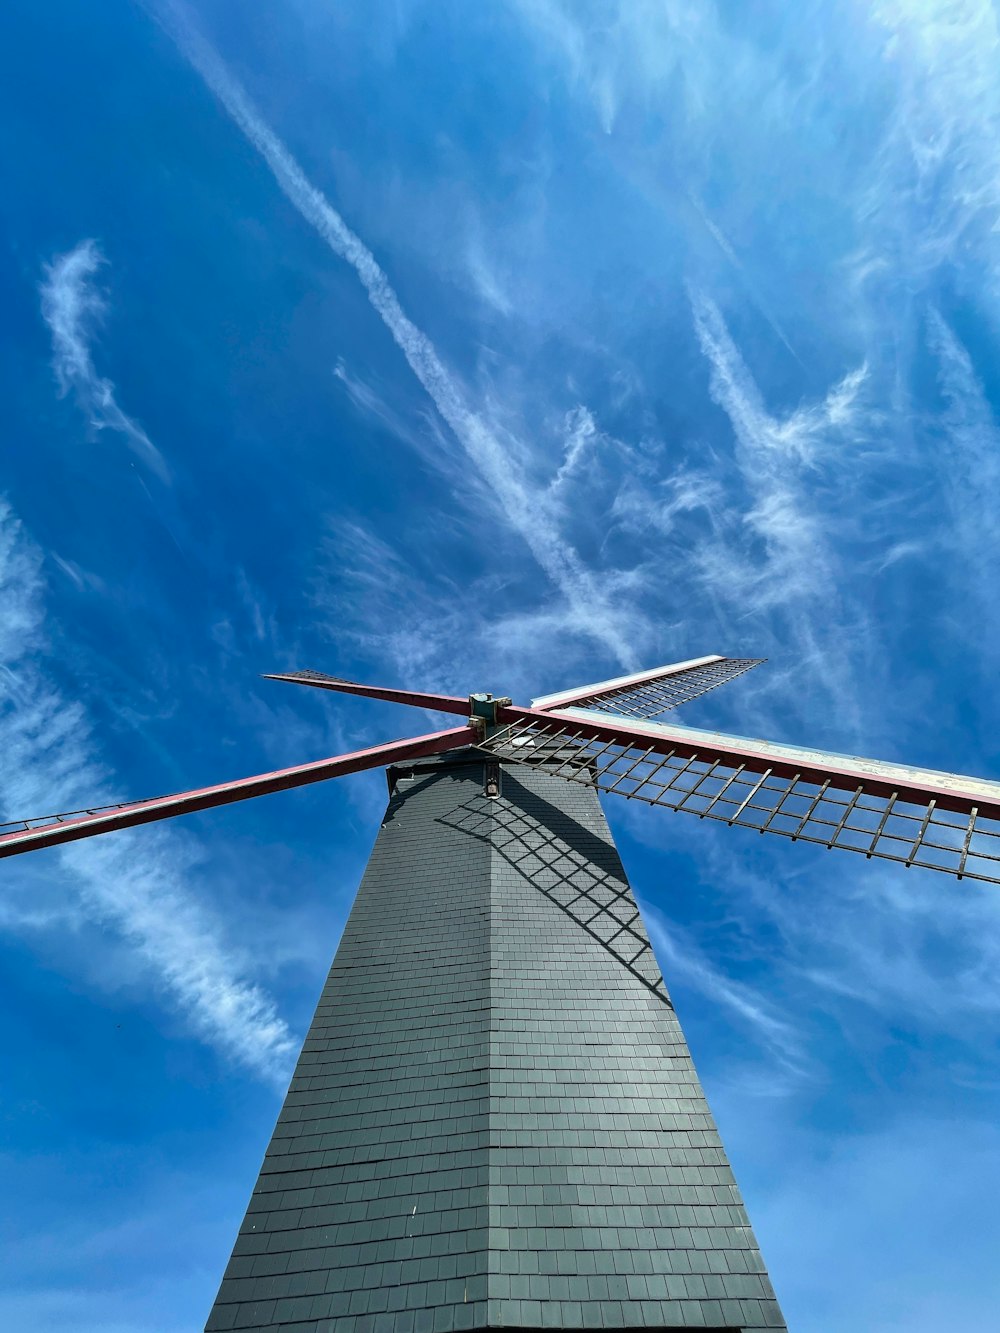 a windmill is shown against a blue sky with wispy clouds